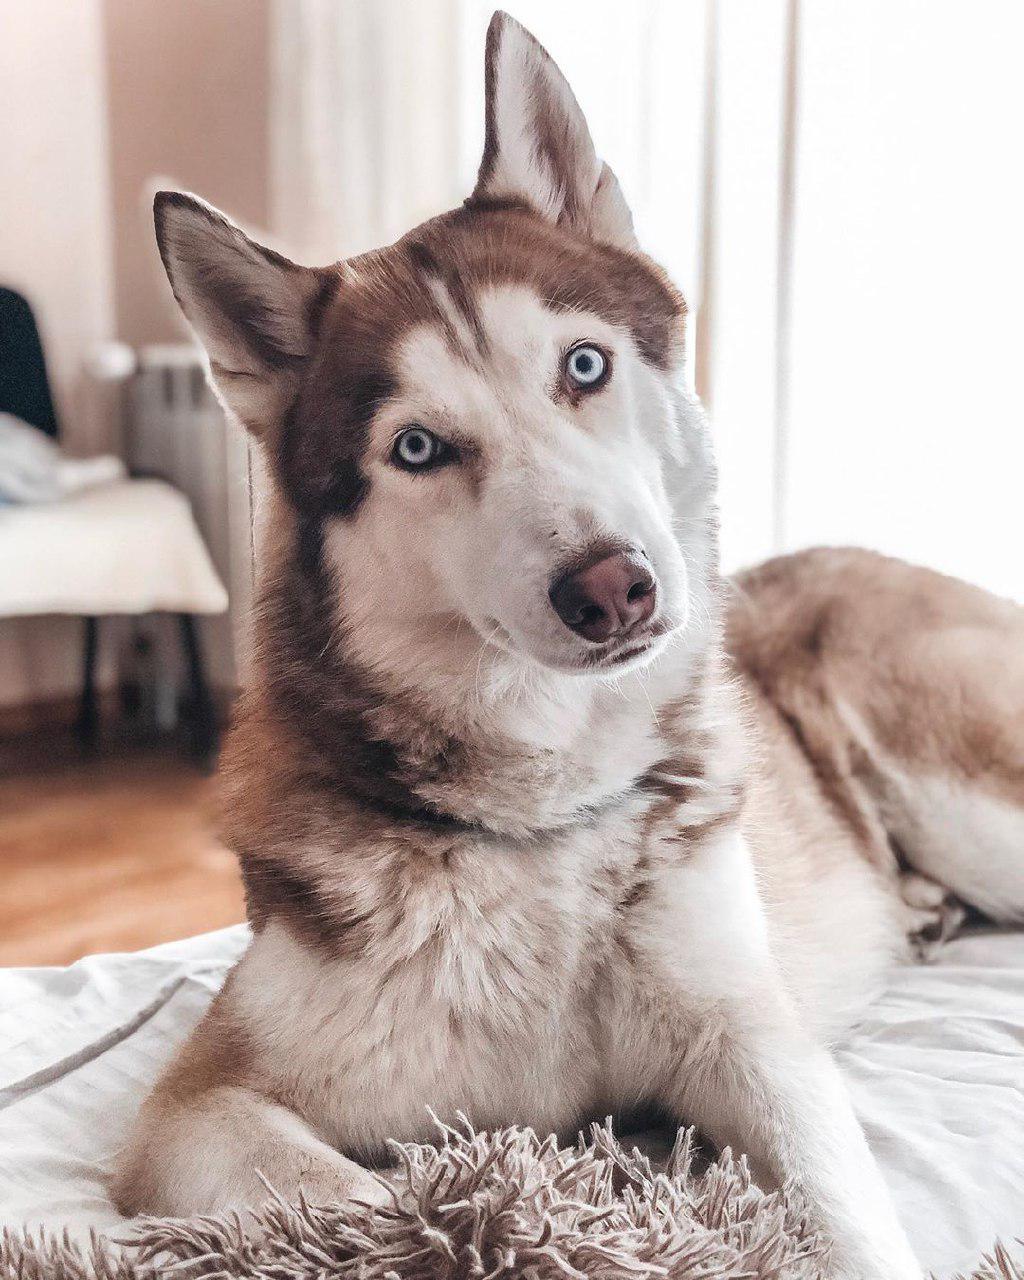 A Siberian Husky lying on the bed while tilting its head